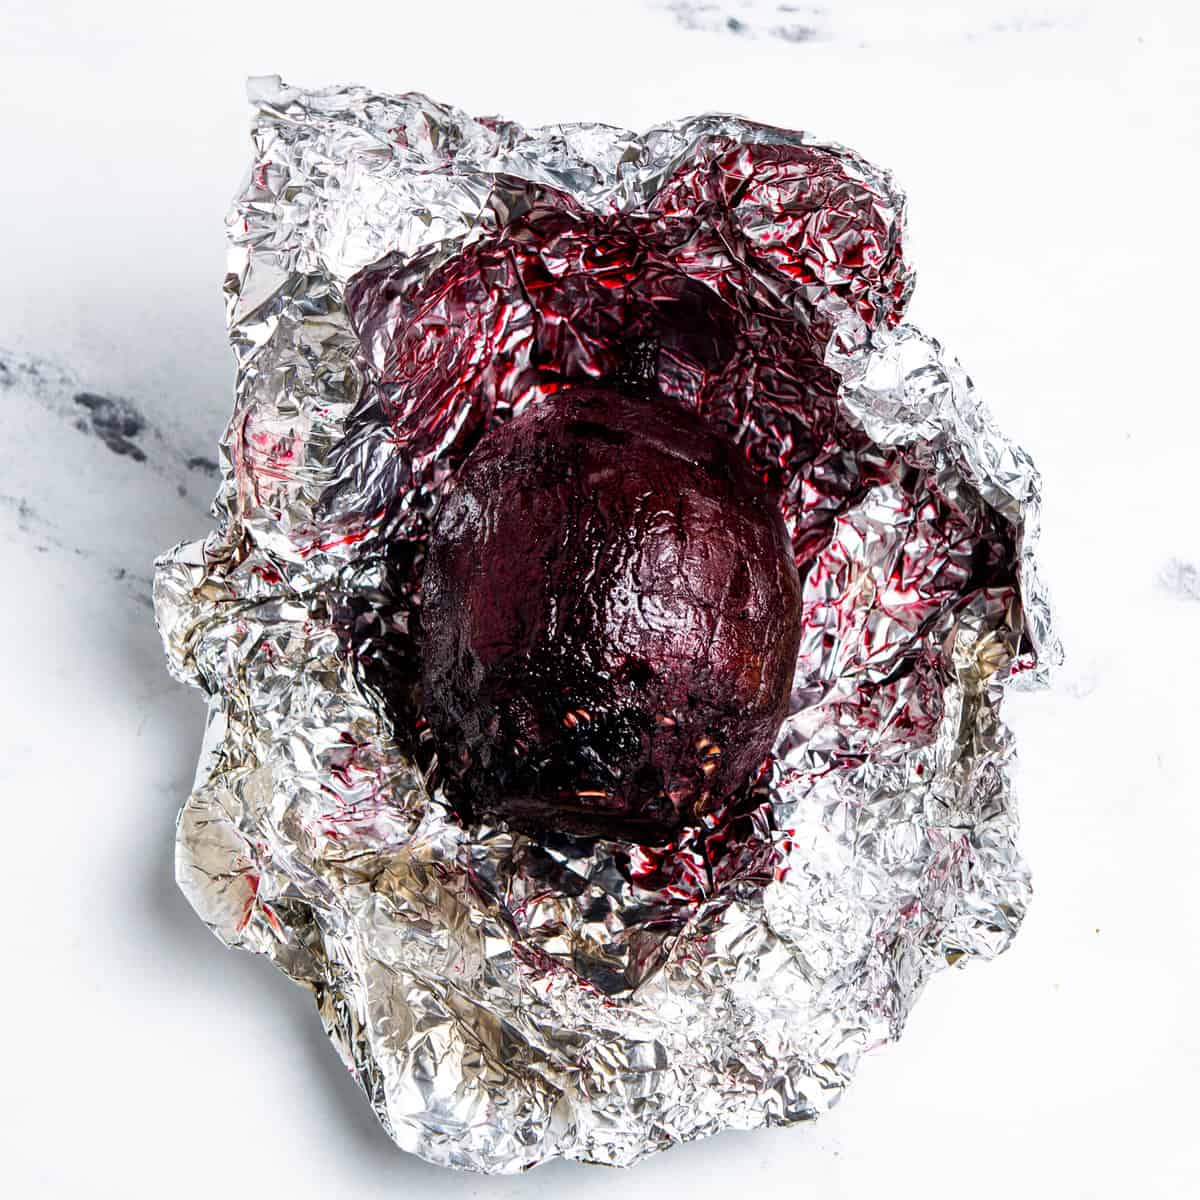 Roasted beets in foil.